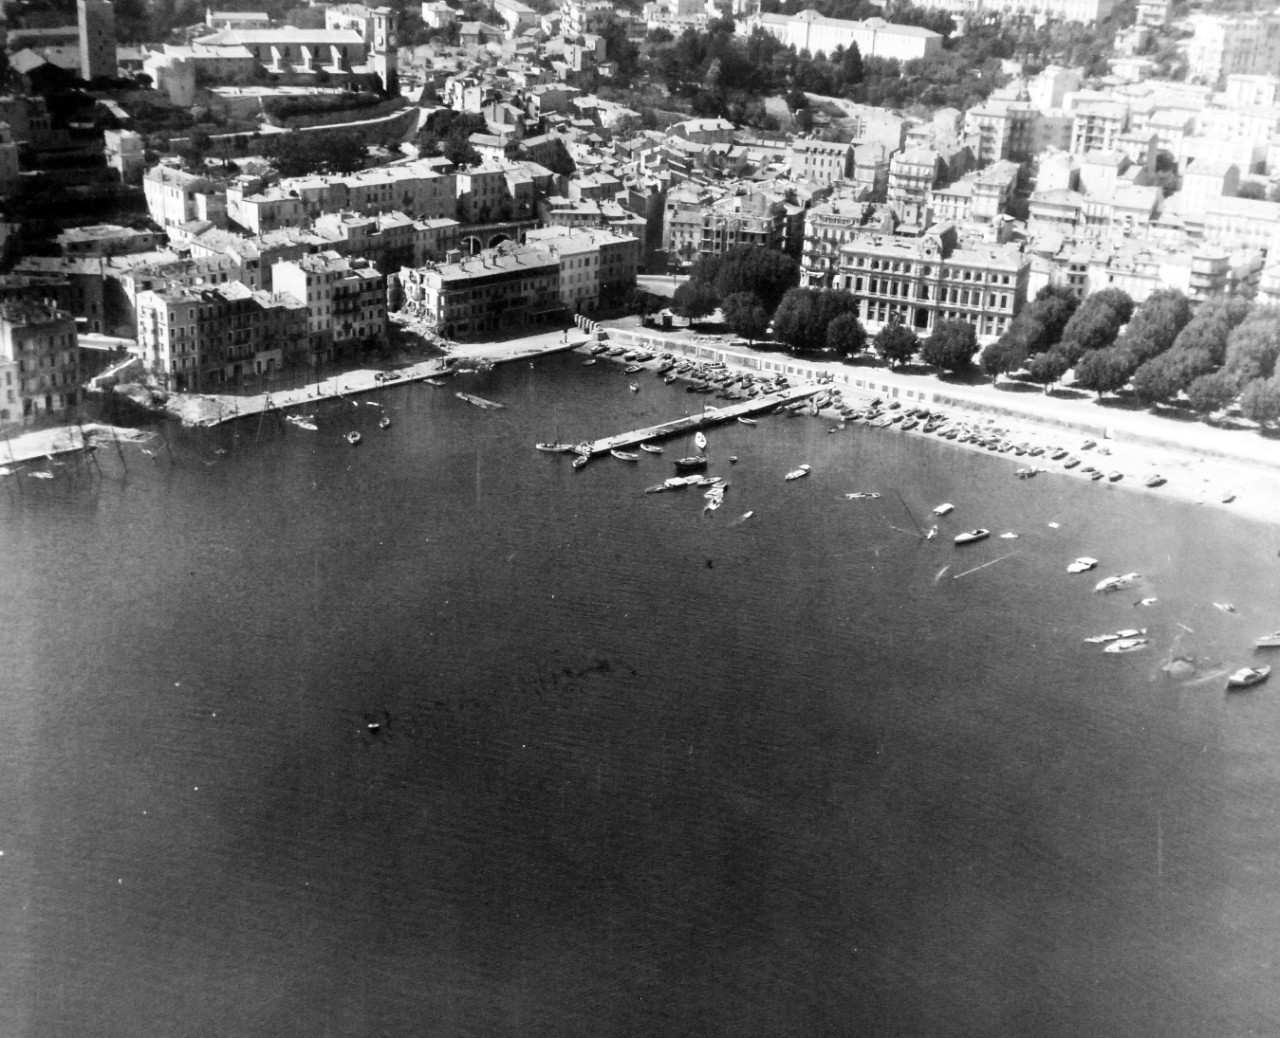 80-G-364083:  Invasion of Southern France, Toulon, August 1944.   Aerial view of Antibes, Toulon, France, showing destruction as a result of bombing.   Taken by crew of USS Catoctin (AGC-5).  Photograph received on 2 April 1946.   Official U.S. Navy Photograph, now in the collections of the National Archives.  (2014/7/10).